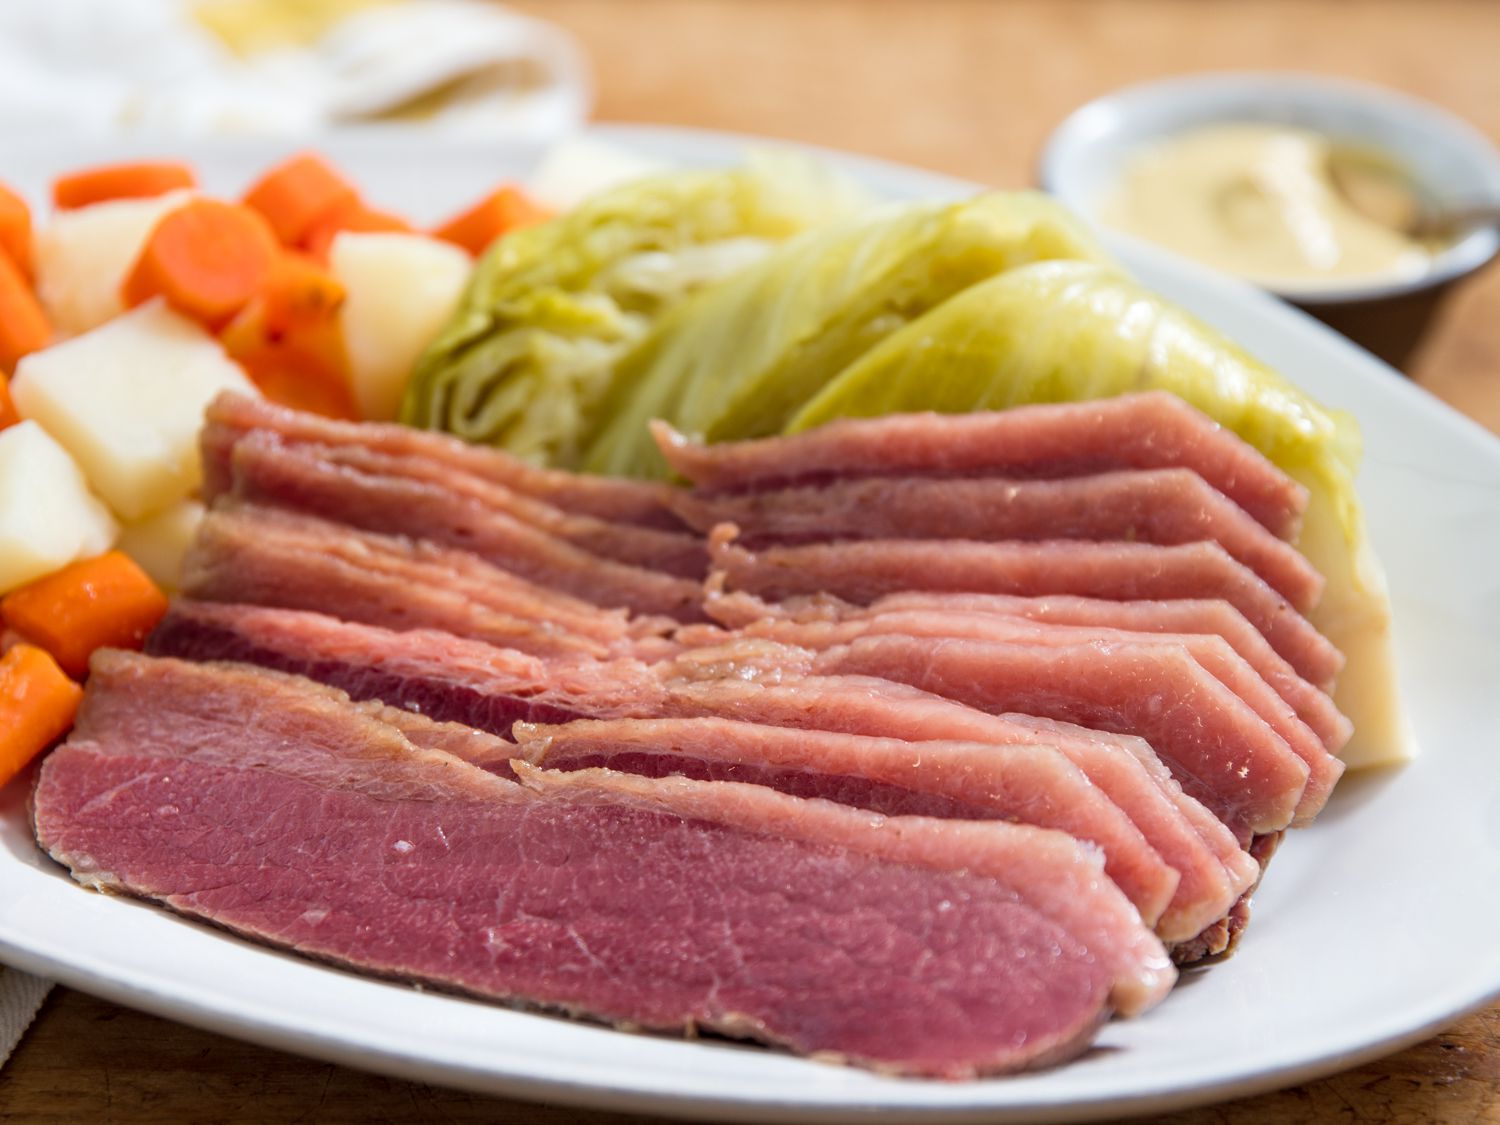 Corned beef wasn’t made by cattle that were strictly fed corn. My mom couldn’t stop laughing. -u/Ilikestarwarstoo